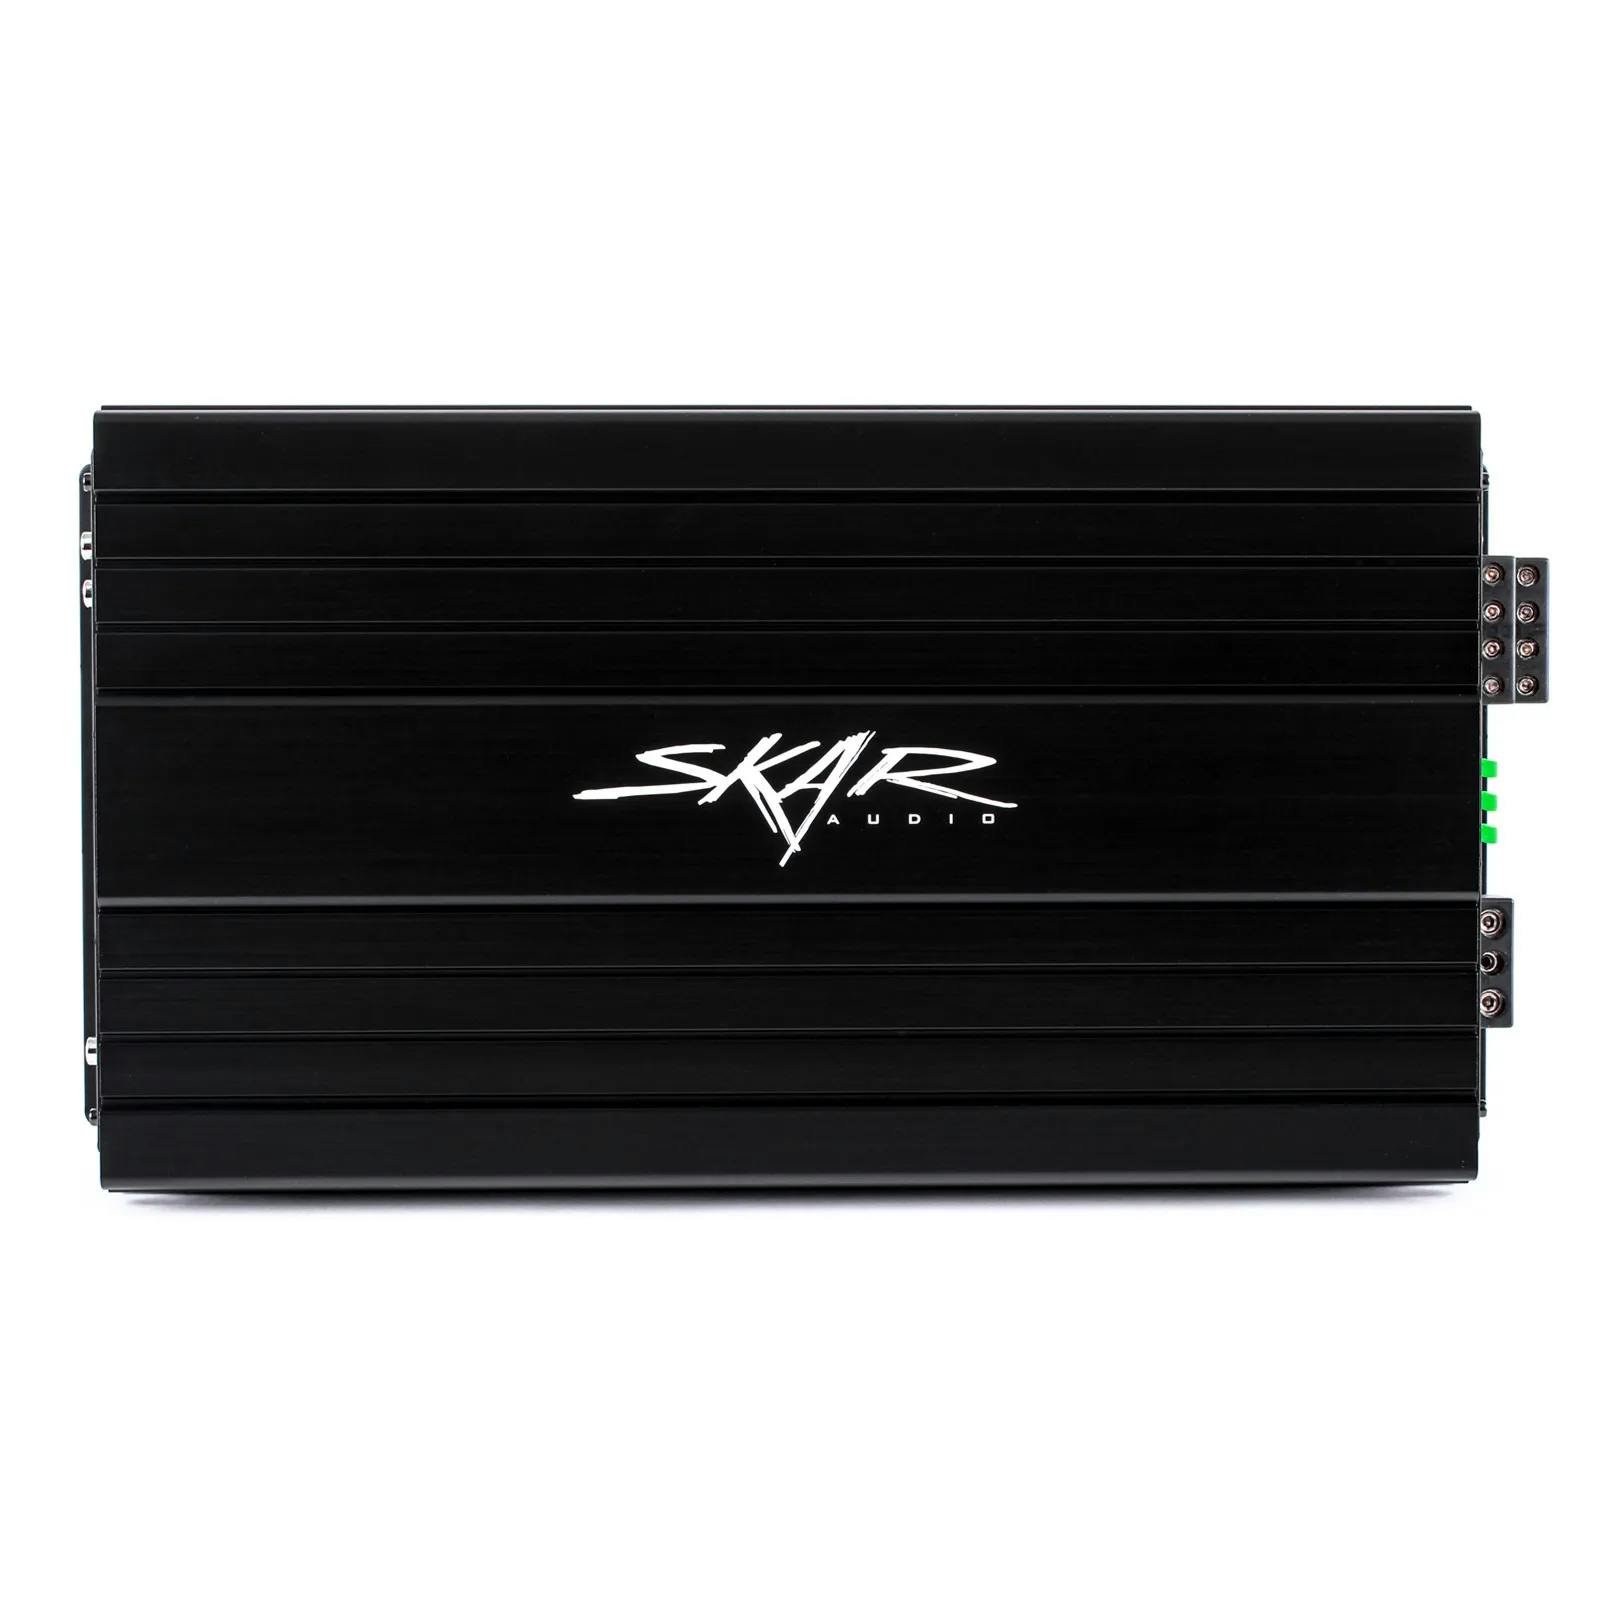 Featured Product Photo for SKv2-100.4AB | 800 Watt 4-Channel Car Amplifier